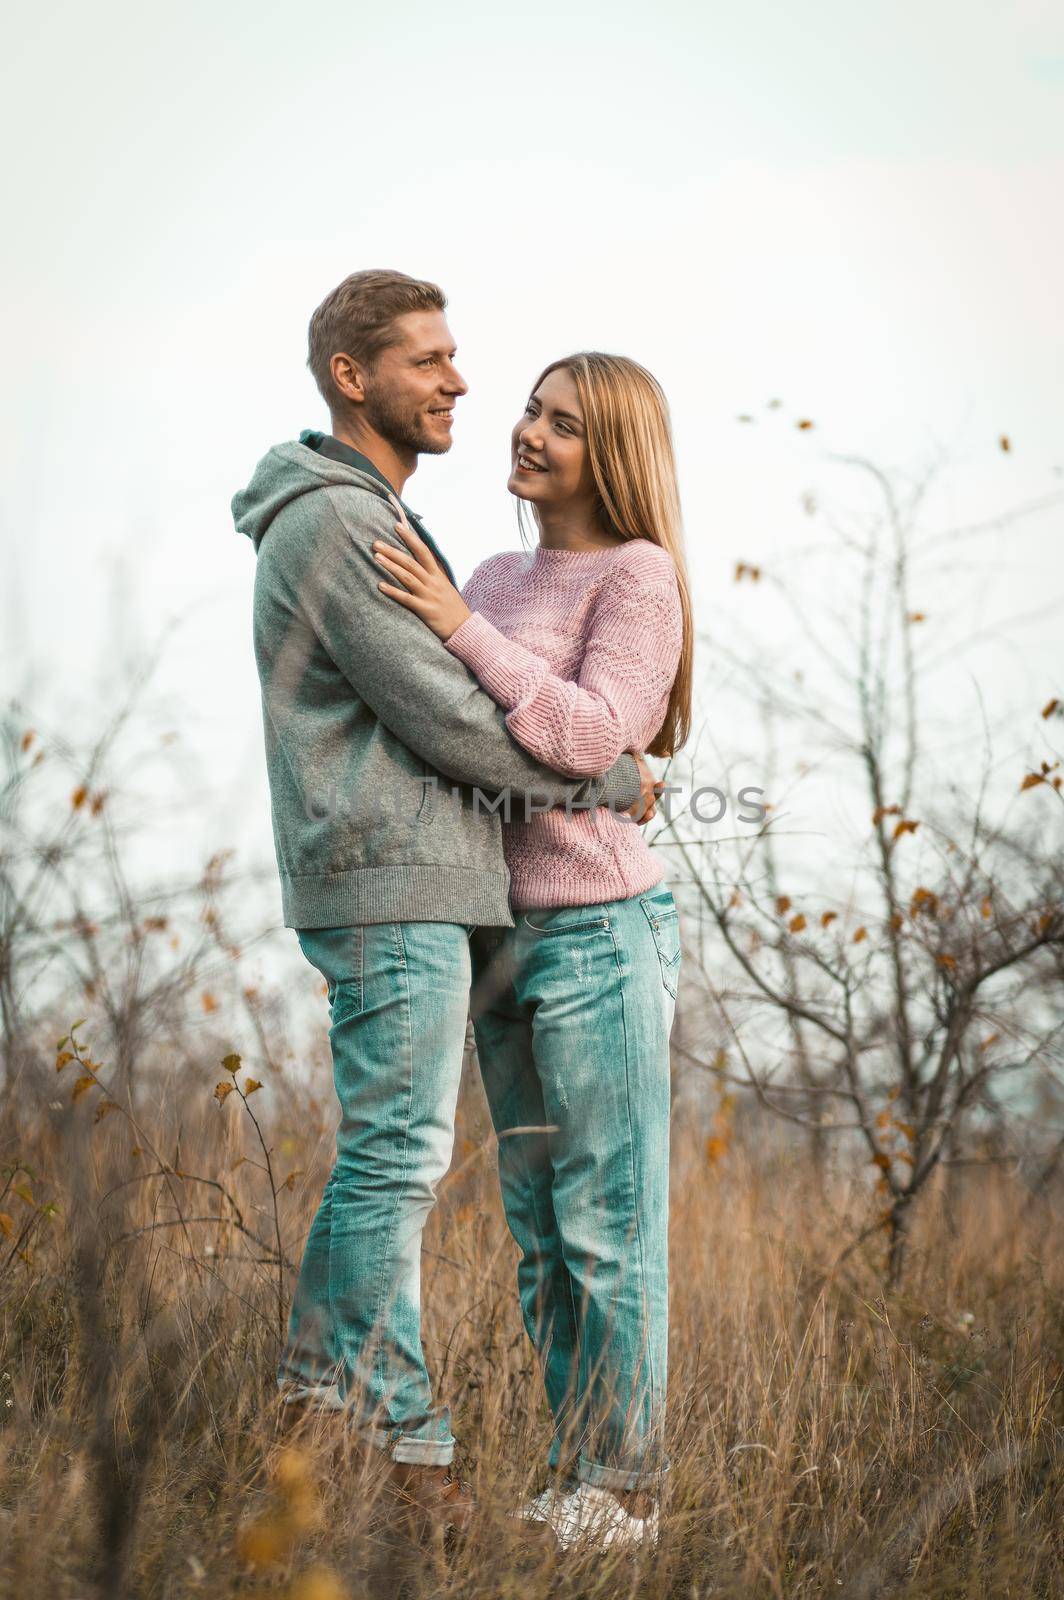 Romantic Couple In Love Stands Embracing On The Grass. Caucasian Man And Woman Dressed In Casual Are Walking In The Fresh Air Outdoors. Healthy Lifestyle Concept.